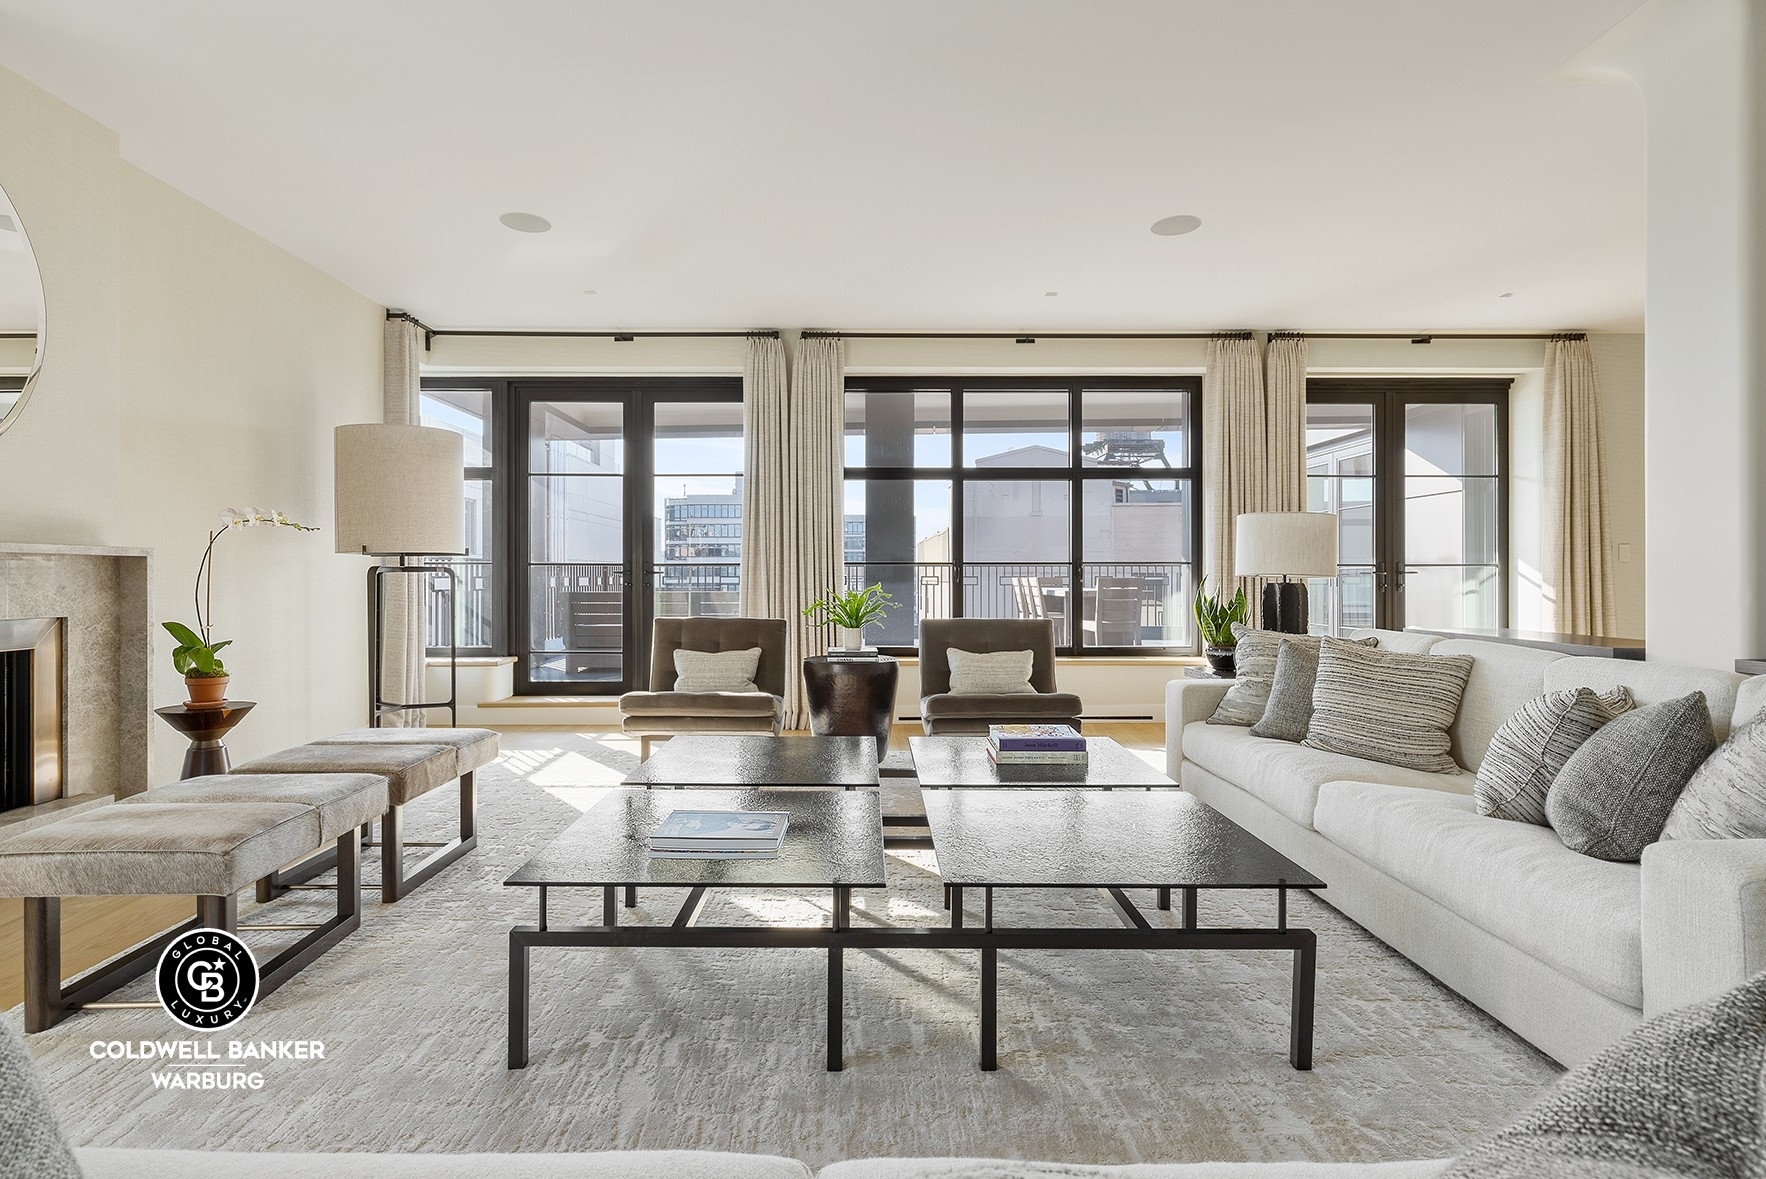 Property for Sale at West Village, New York, New York 10014